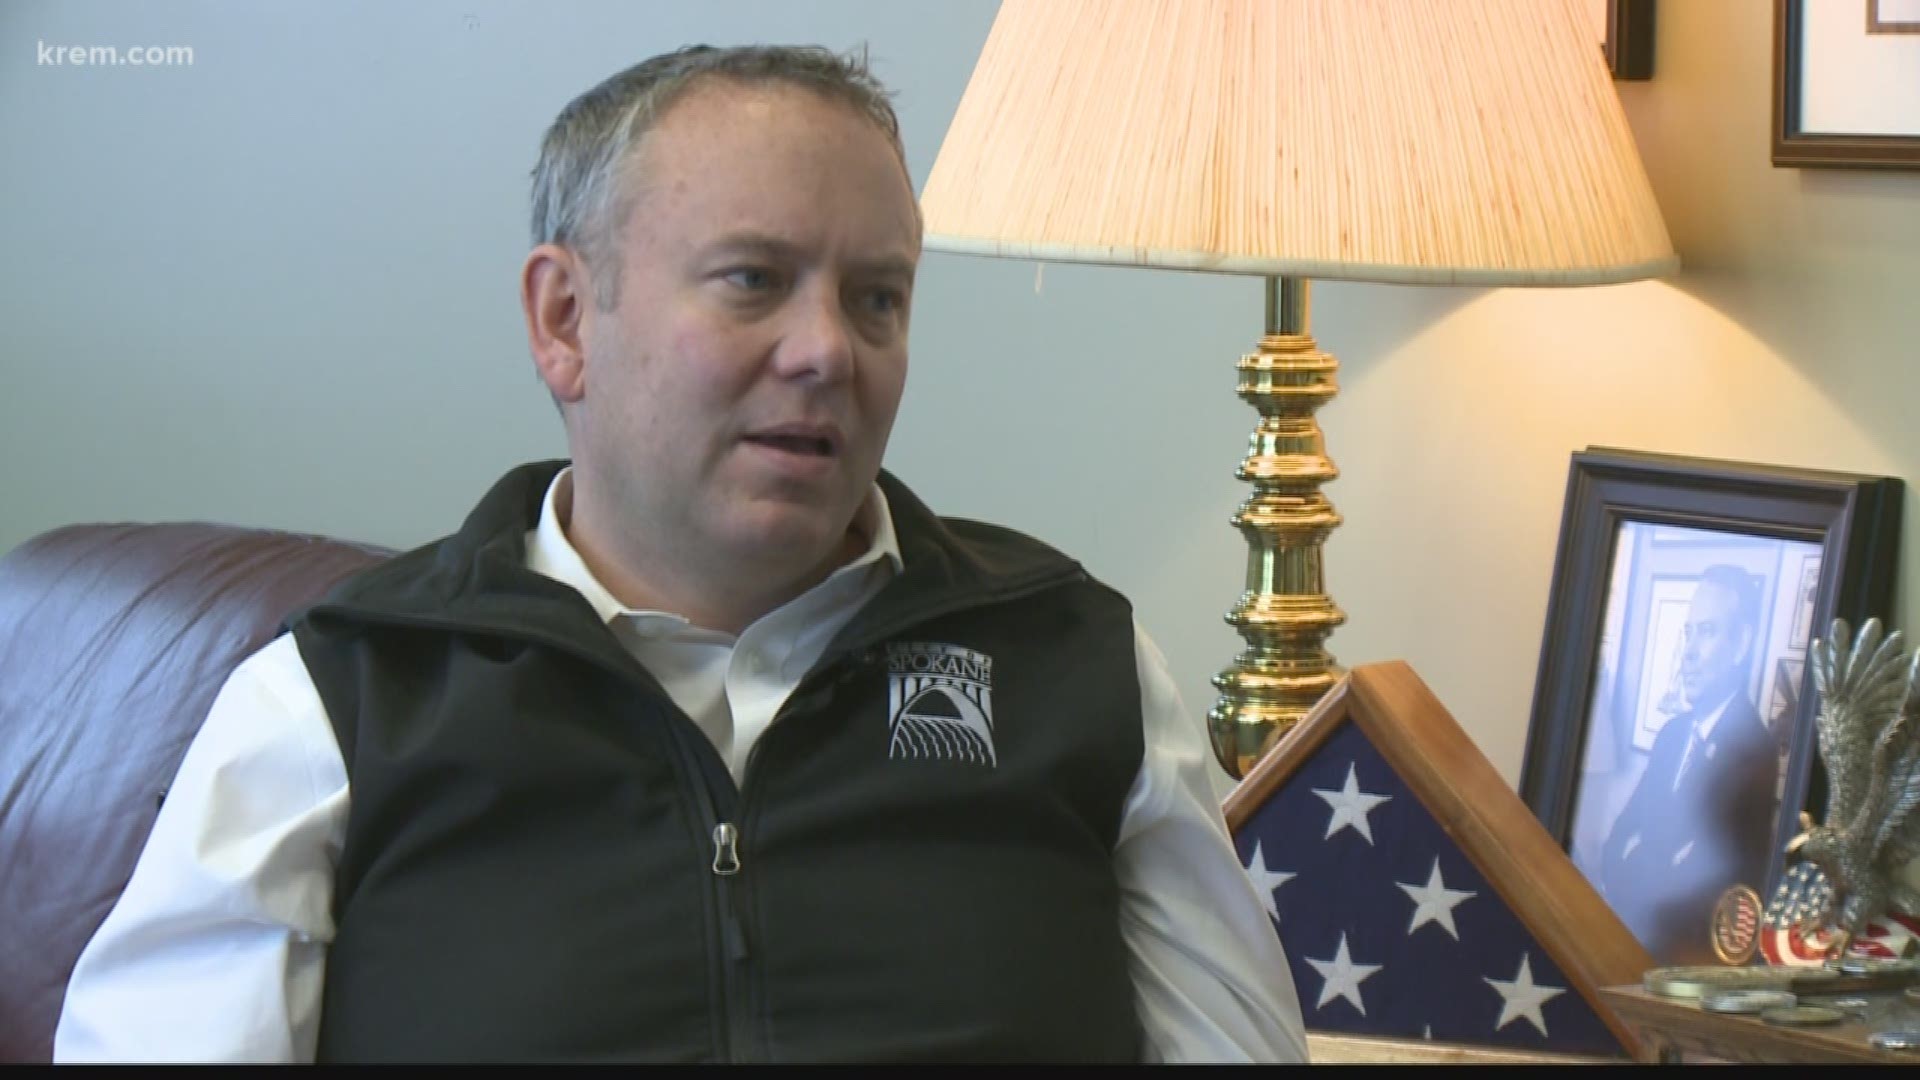 In an exclusive interview with Spokane Mayor David Condon, he responds to claims the city is criminalizing being homeless by having ordinances prohibiting people from sleeping on city streets.